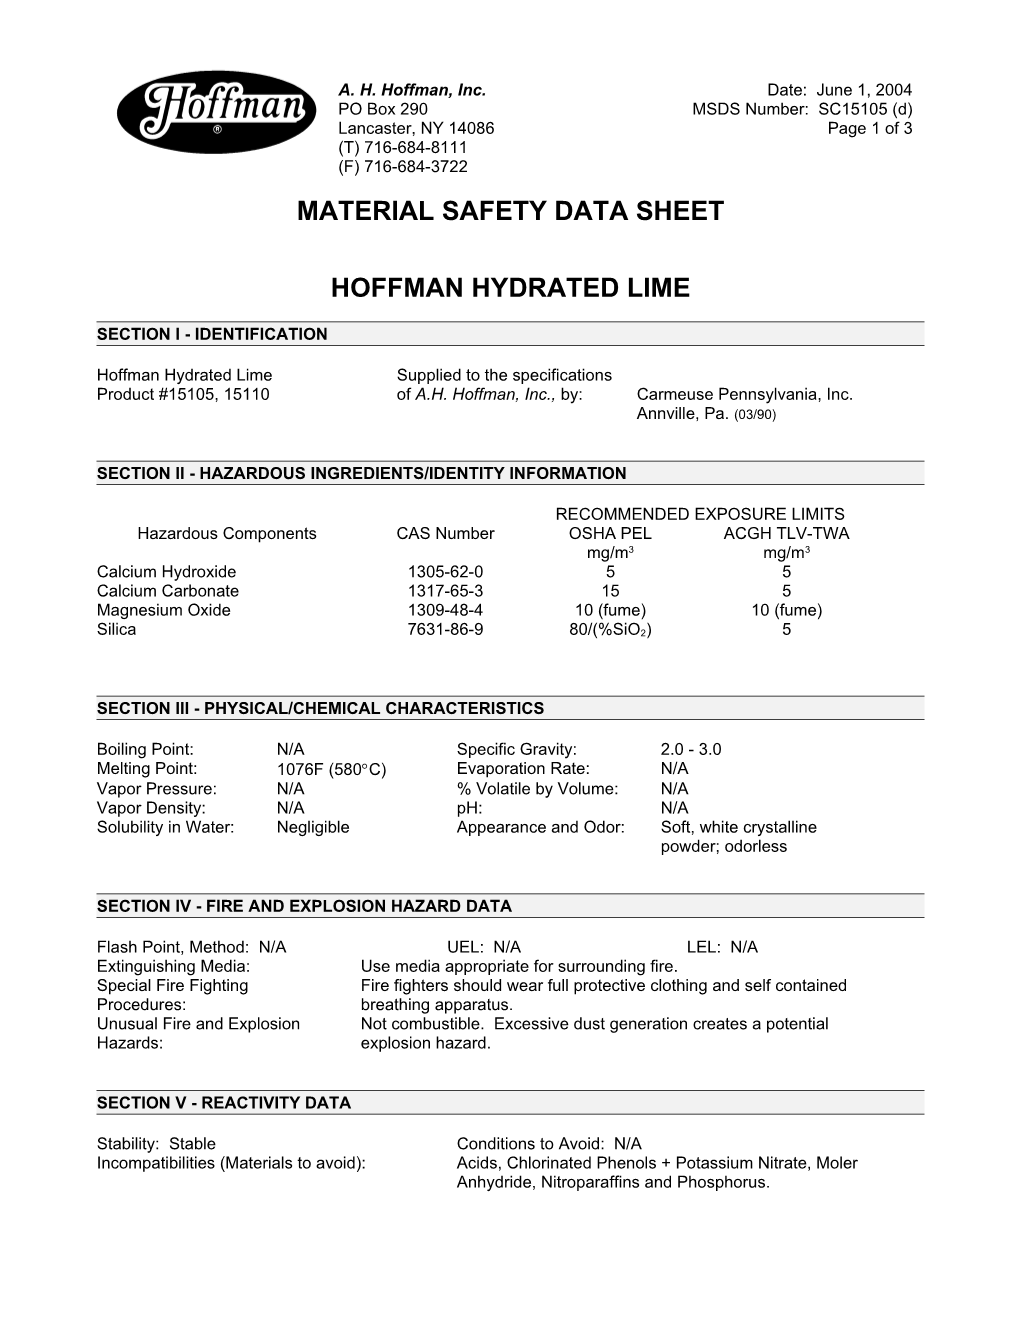 Material Safety Data Sheet s23